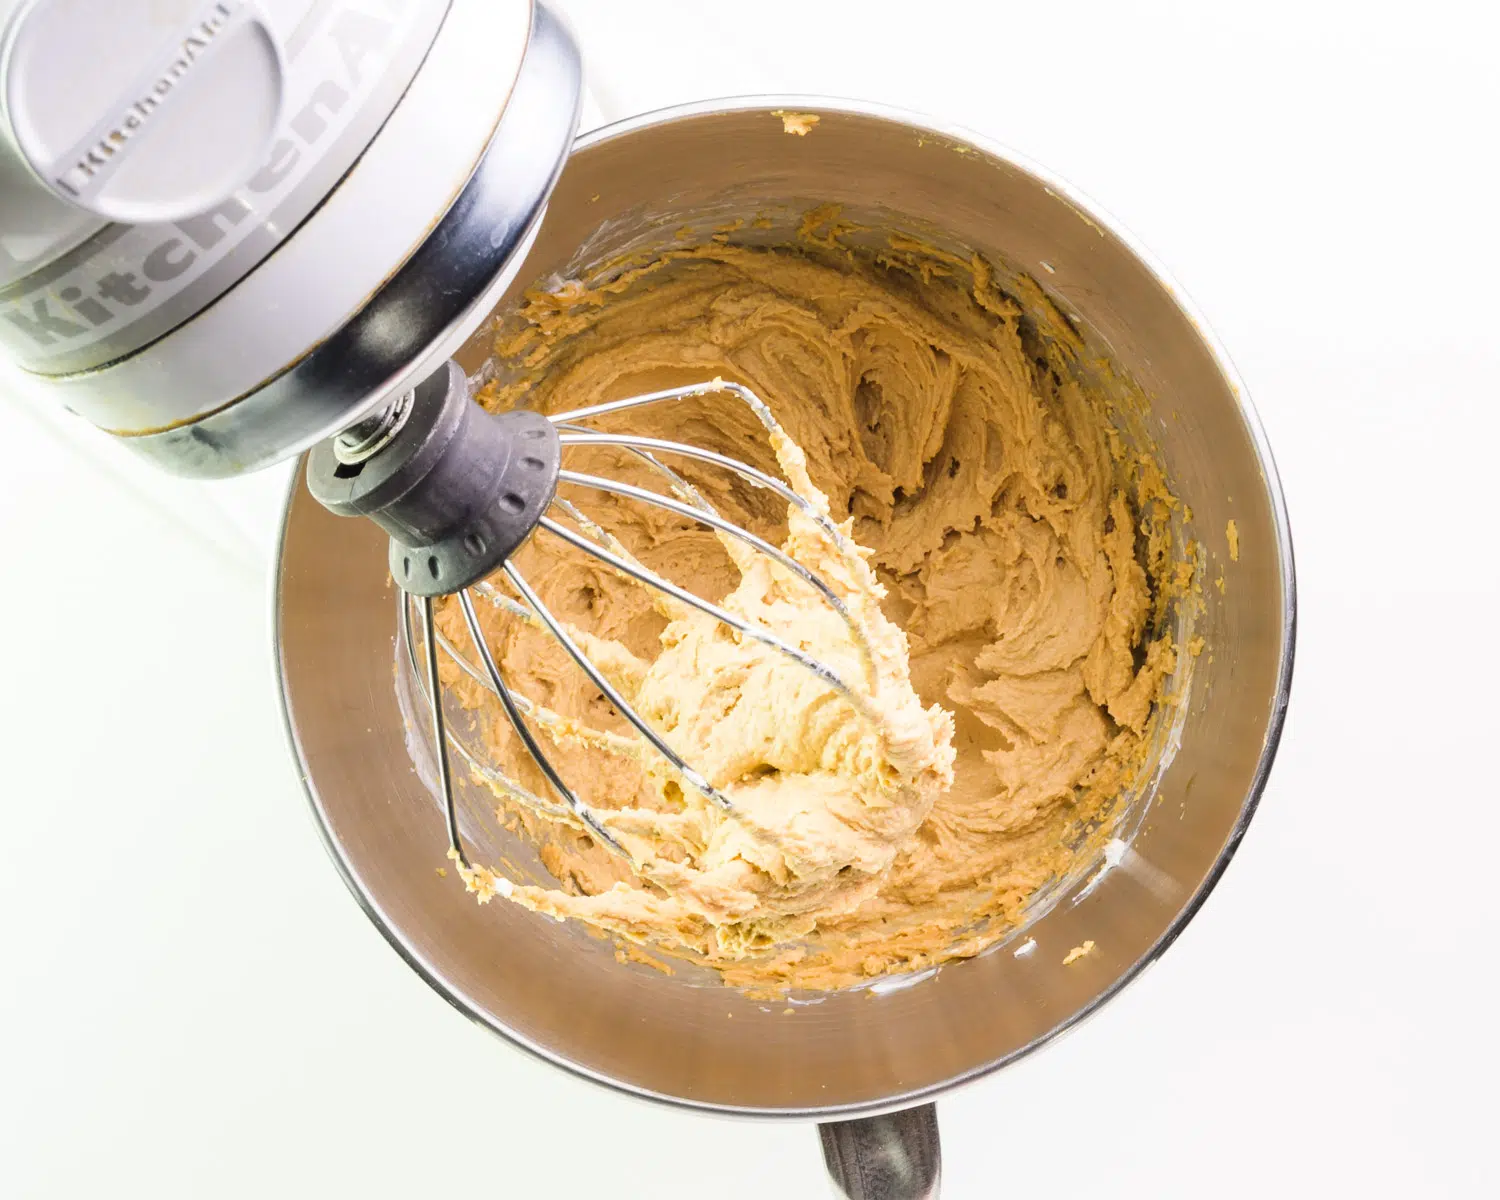 A peanut butter mixture has been whipped with a stand mixer in a mixing bowl.